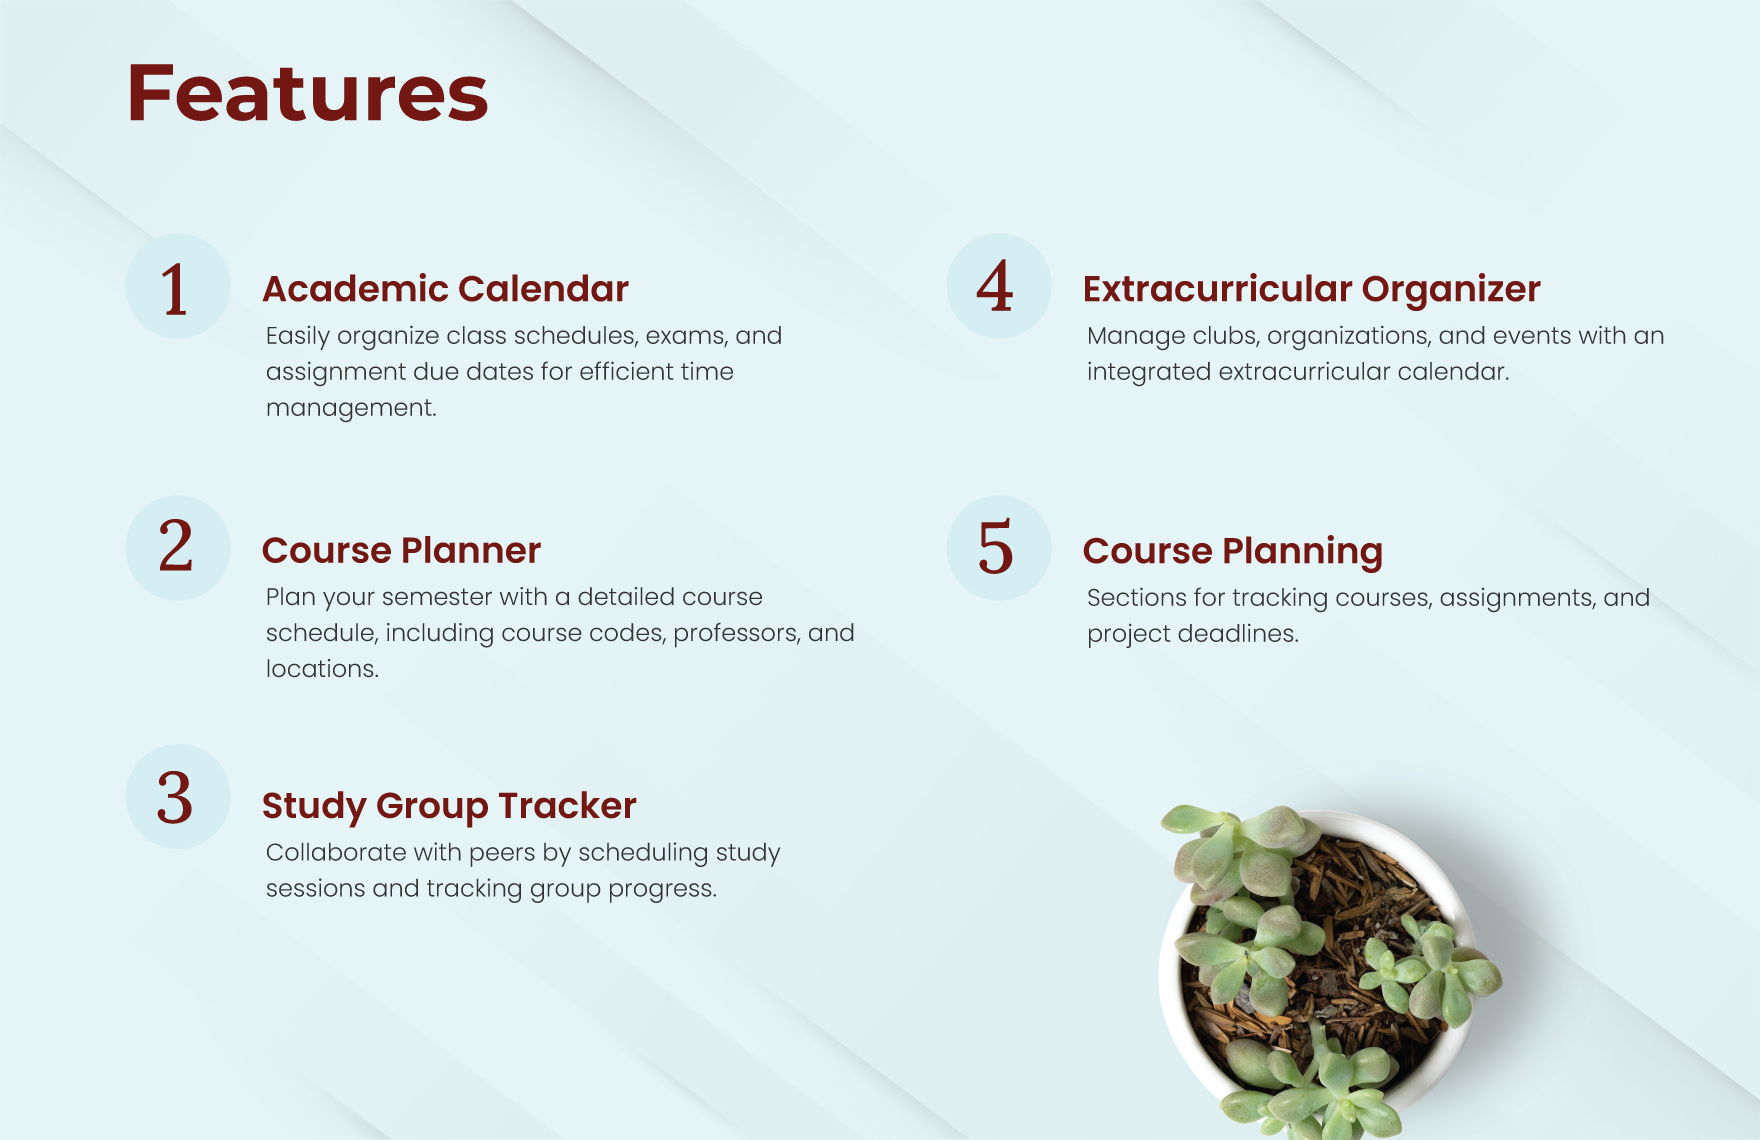 College Planner Template